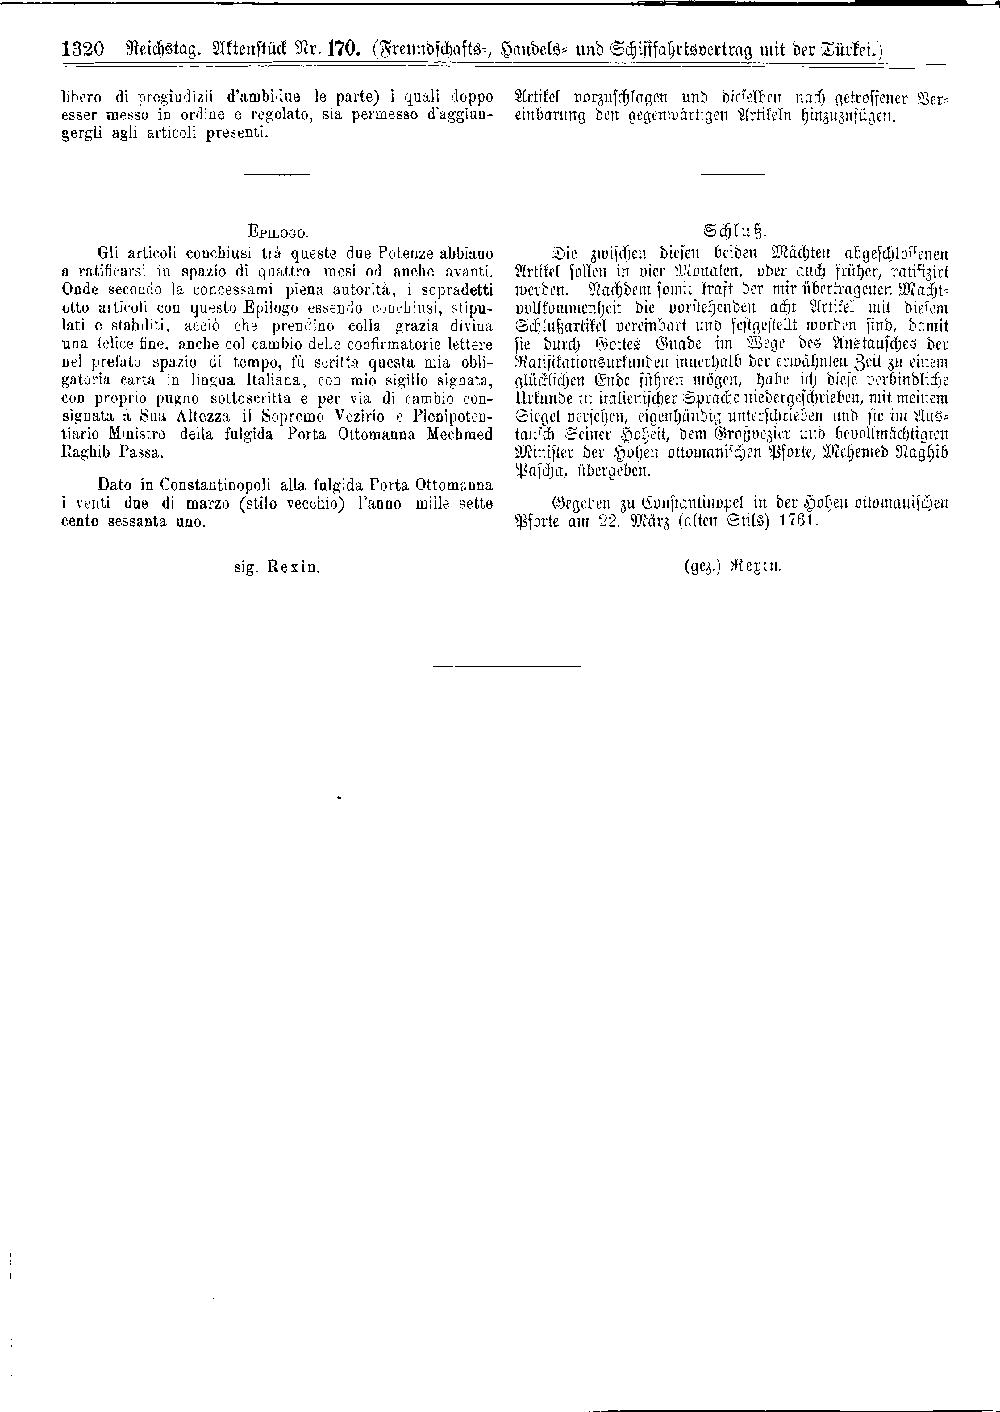 Scan of page 1320